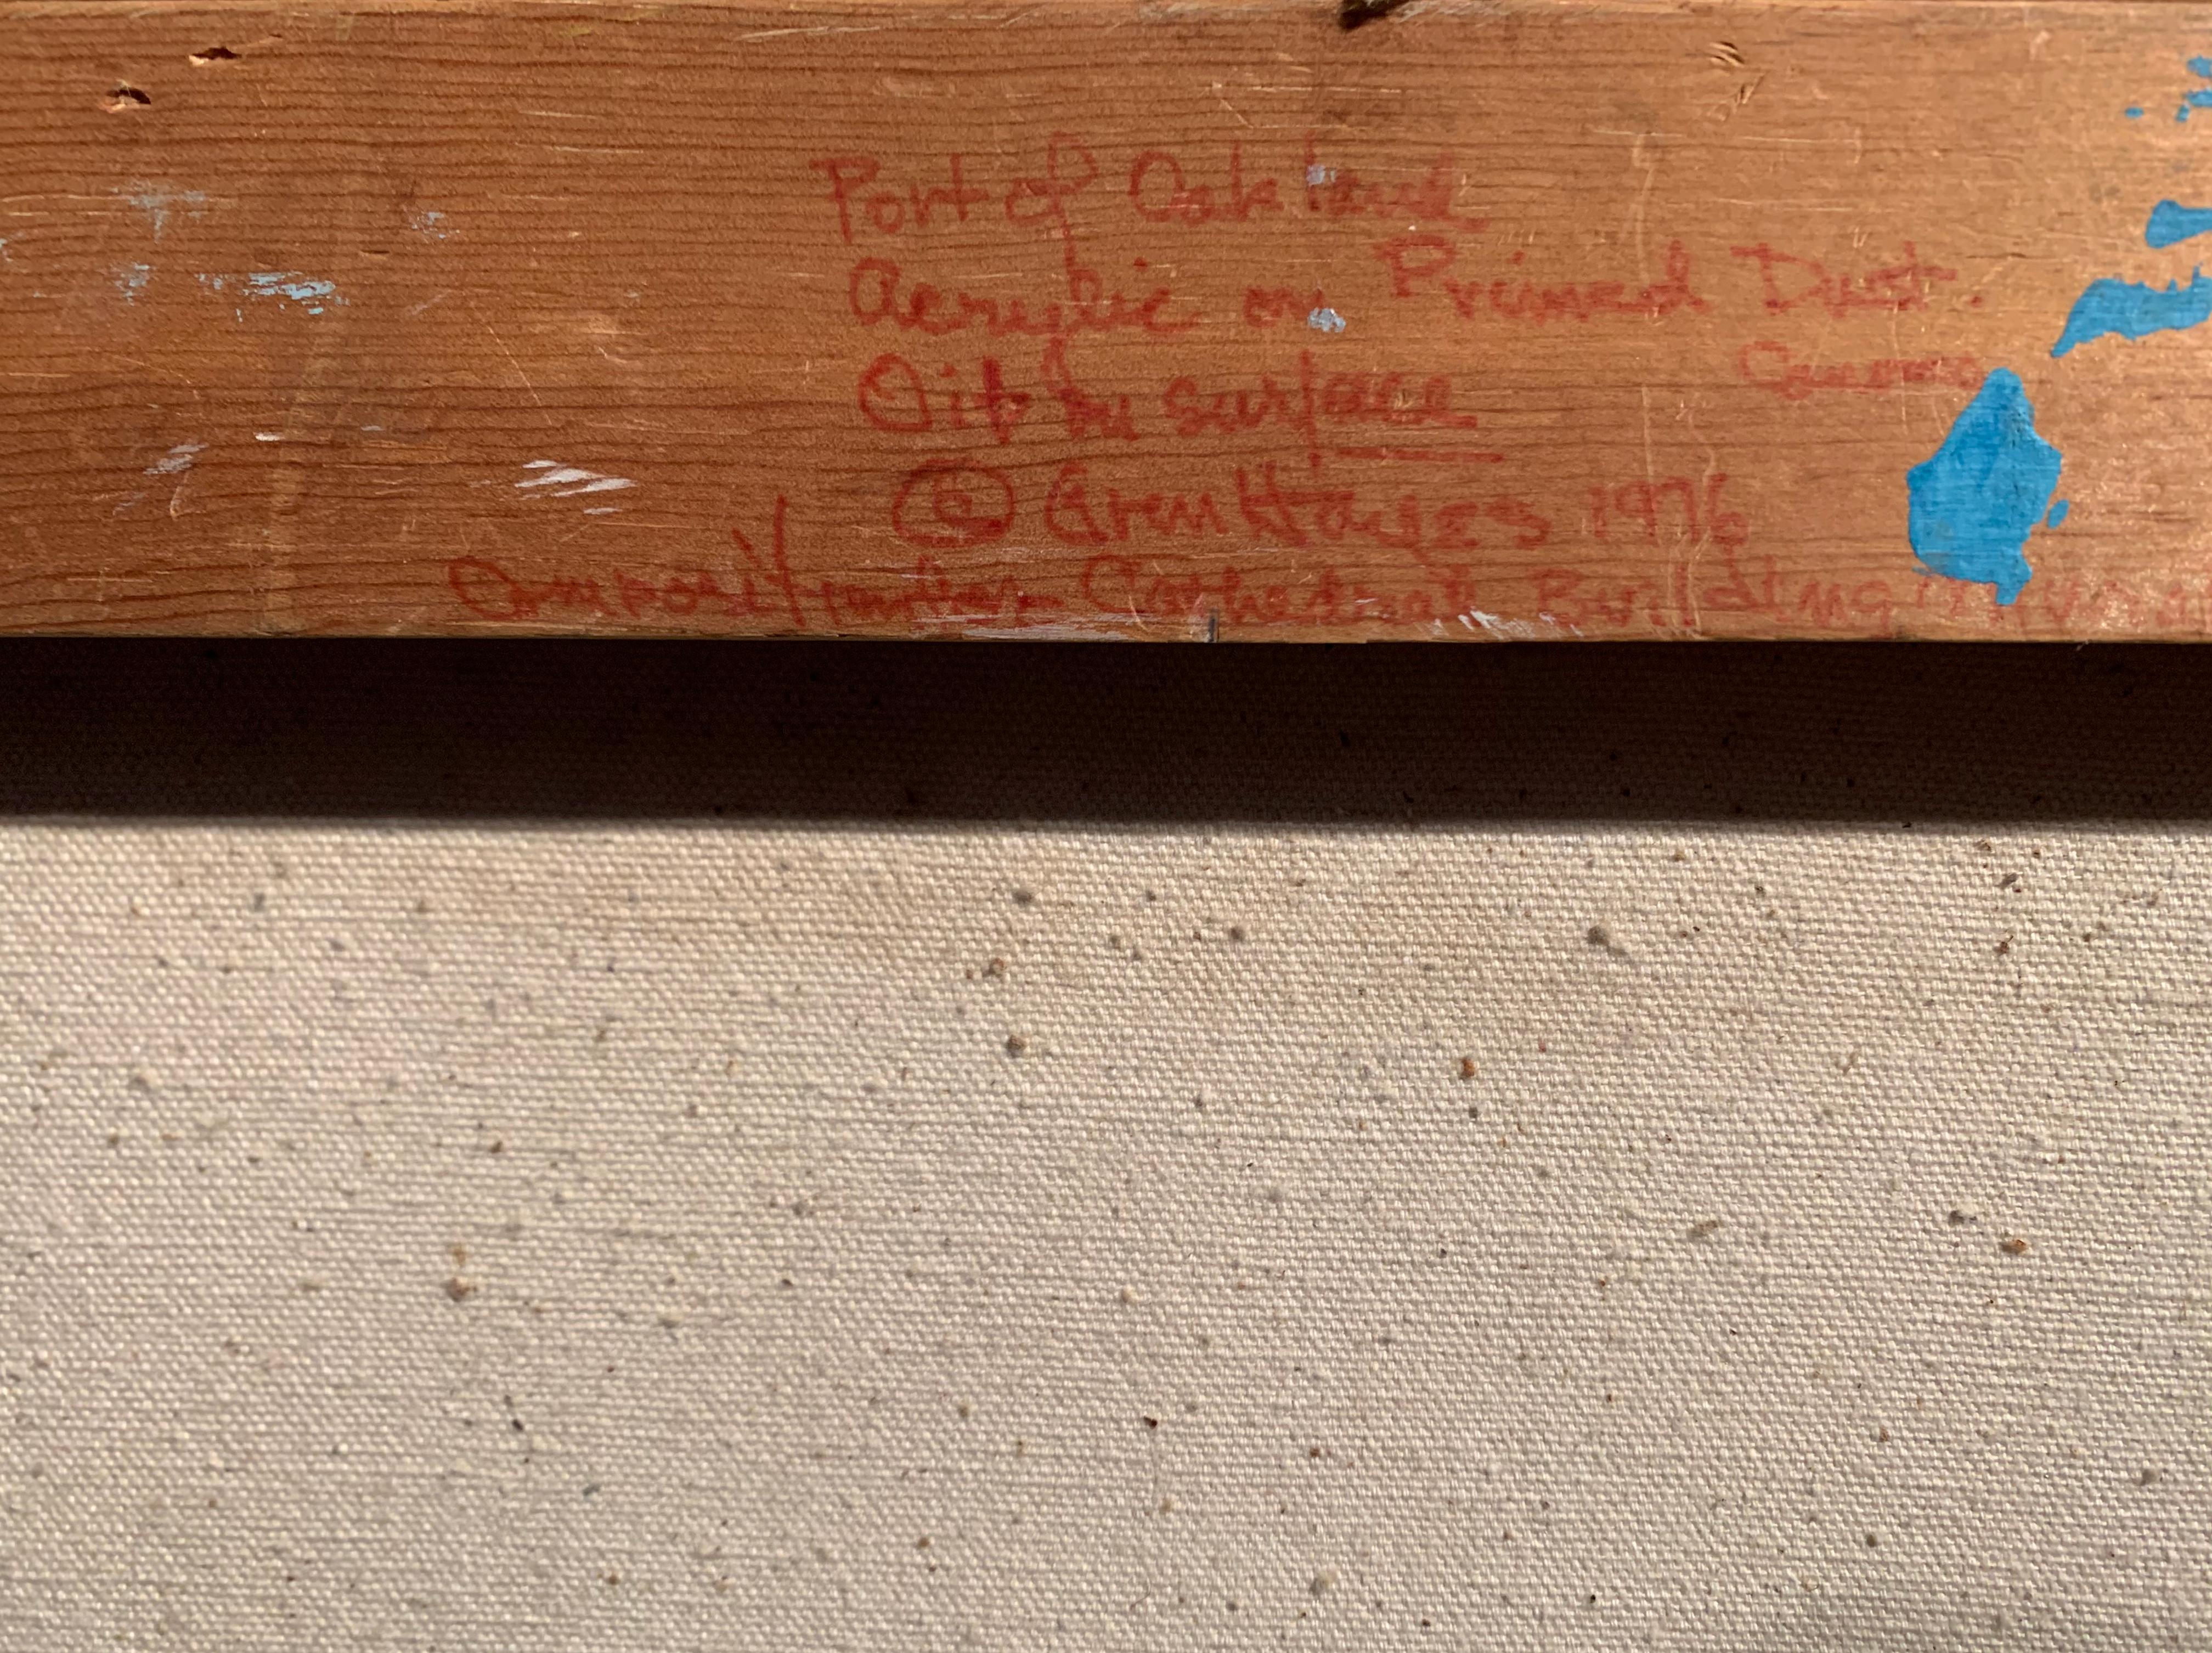 Signed lower right, 'Gren Hayes' (American, born 1932); additionally signed verso twice, titled 'Port of Oakland' on stretcher bar and dated 1976. Inscribed 'Oak. Cathedral Bldg Mural #1 sketch' verso.

Bay Area Figurative / Bay Area Feminist Art